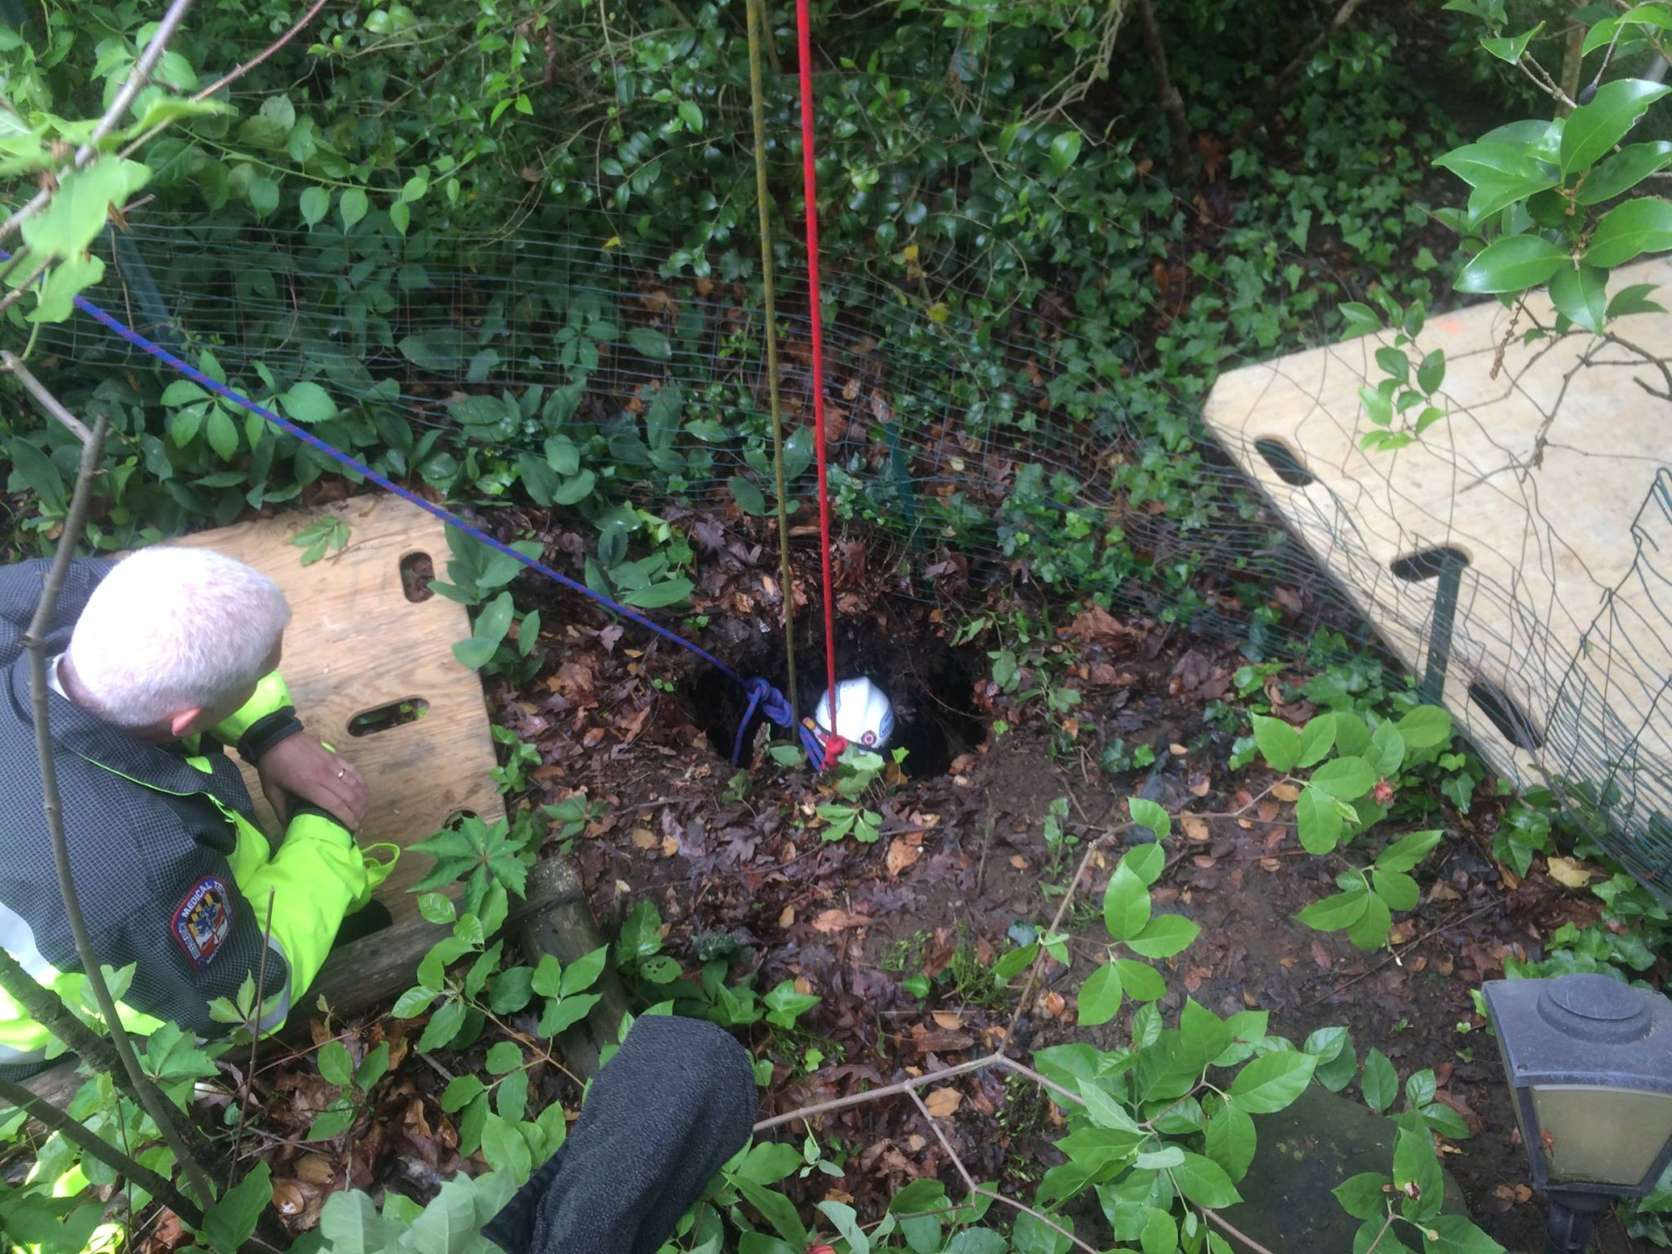 Firefighters rescued an 85-pound border collie that fell in a sinkhole in Woodland Beach. (Courtesy Anne Arundel County Fire Department)